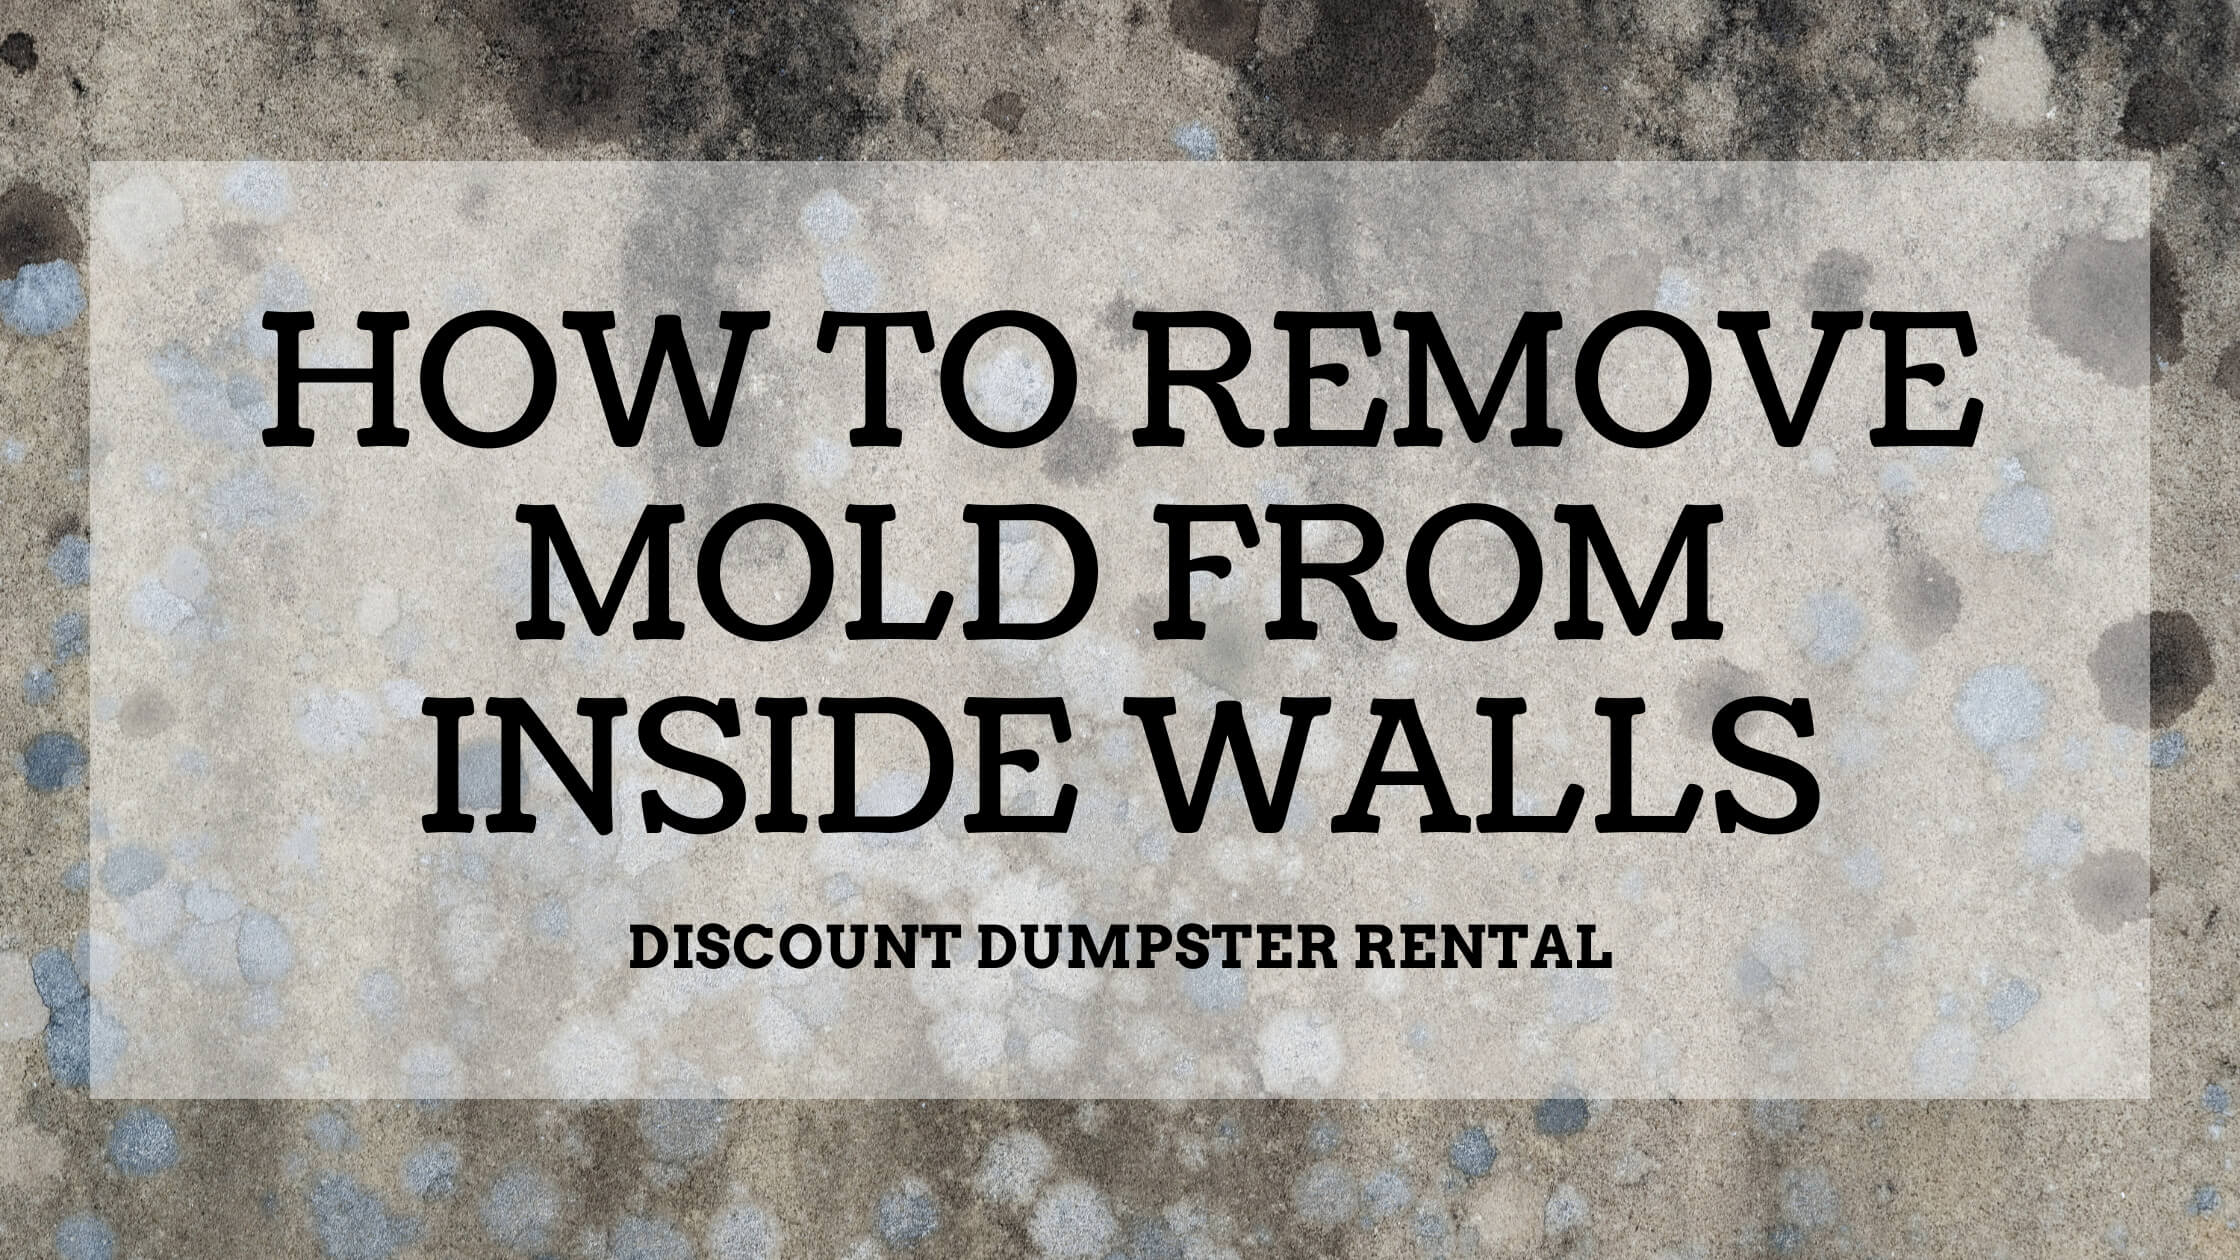 How to Remove Mold from Inside Walls